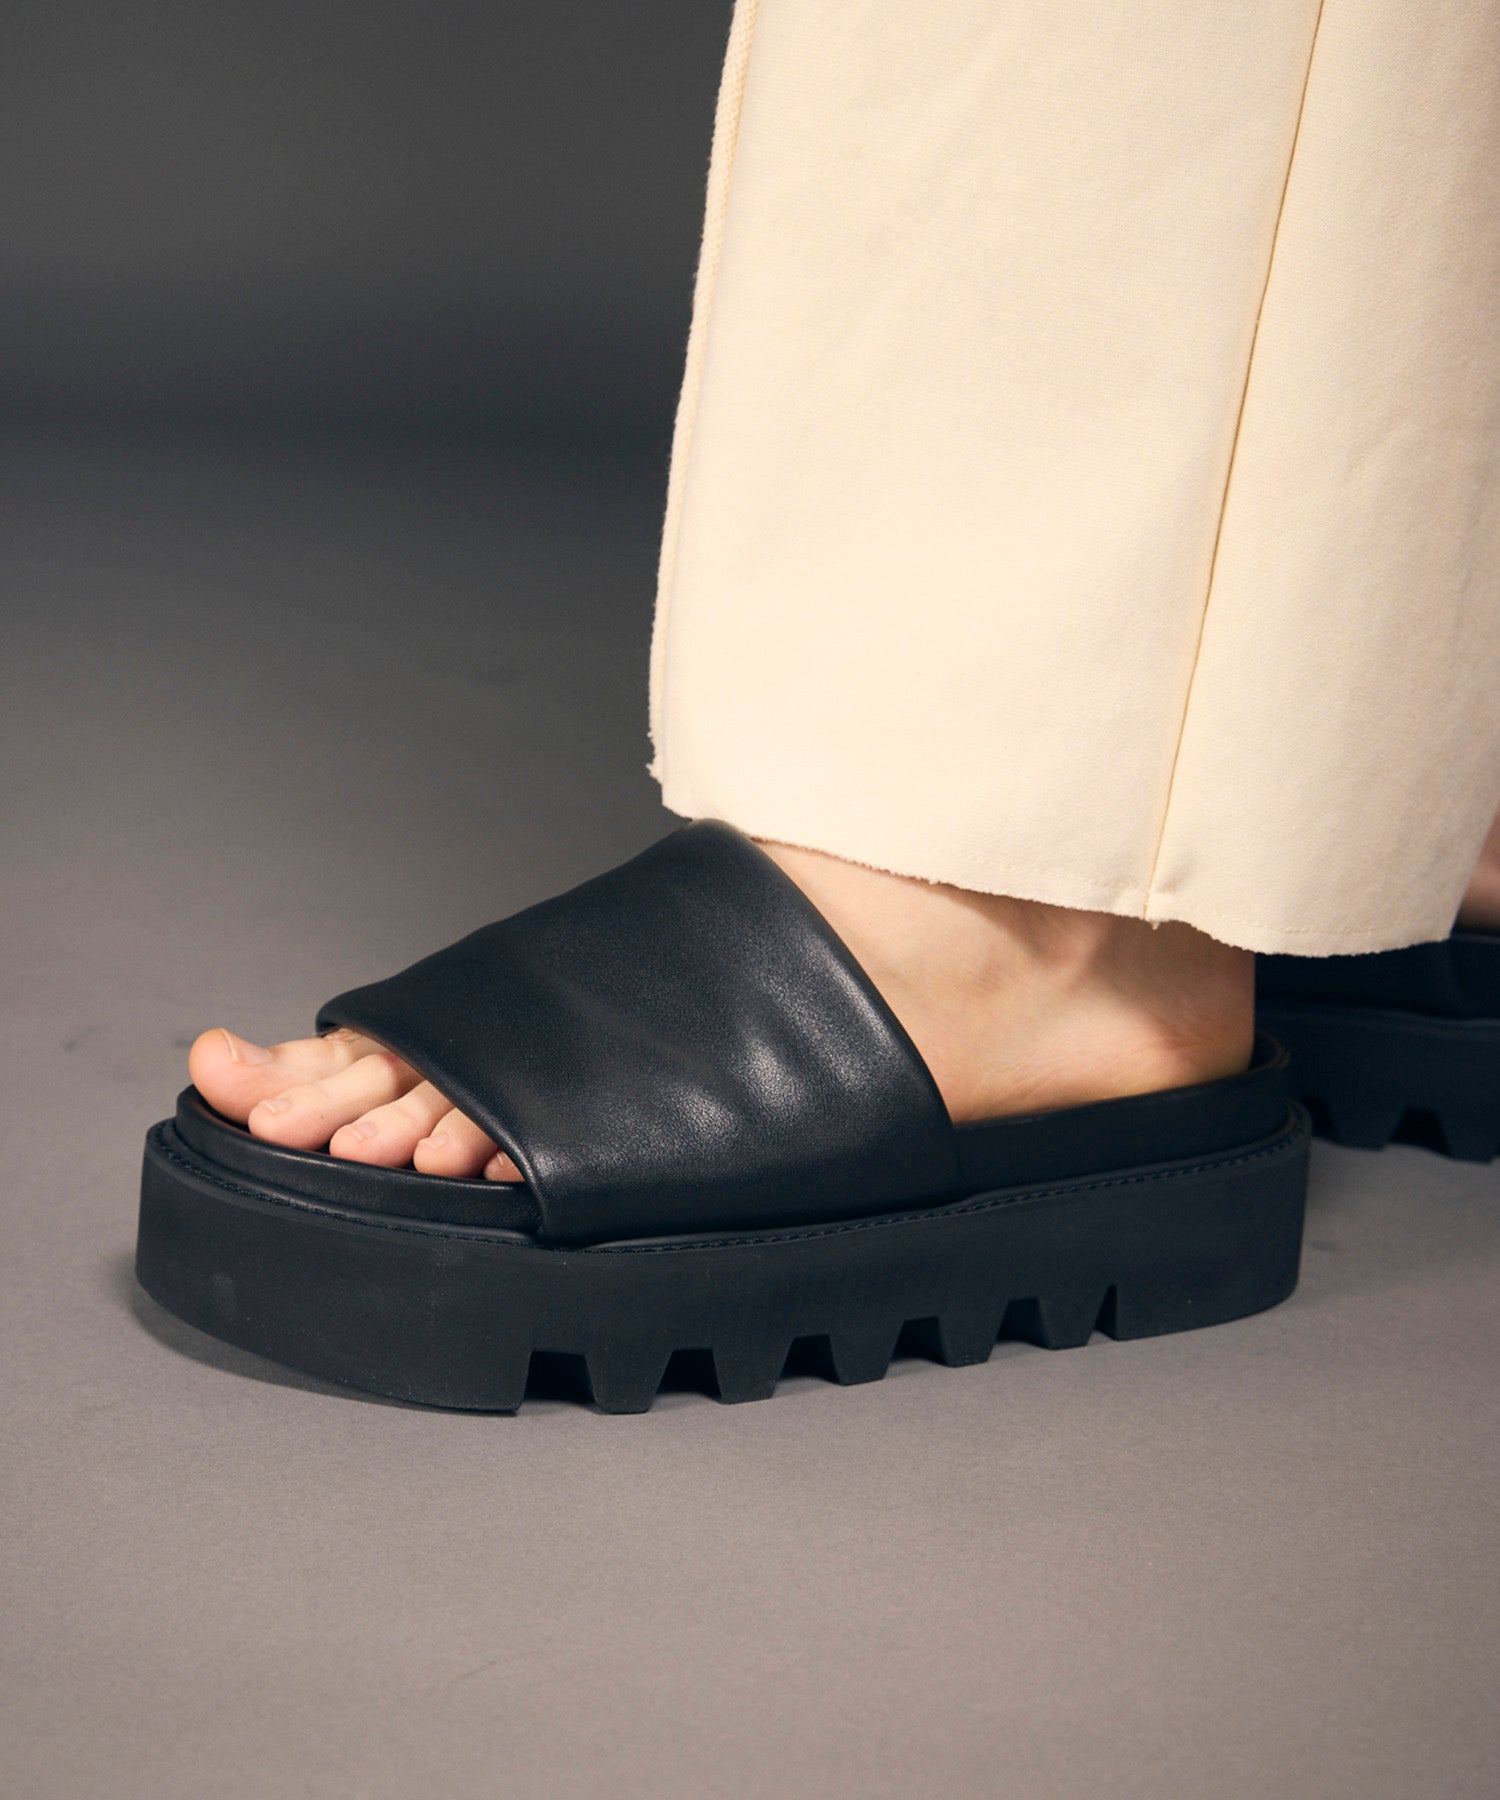 【SPECIAL SHOES FACTORY COLLABORATION】Tank Sole Shower Sandal Made In TOKYO